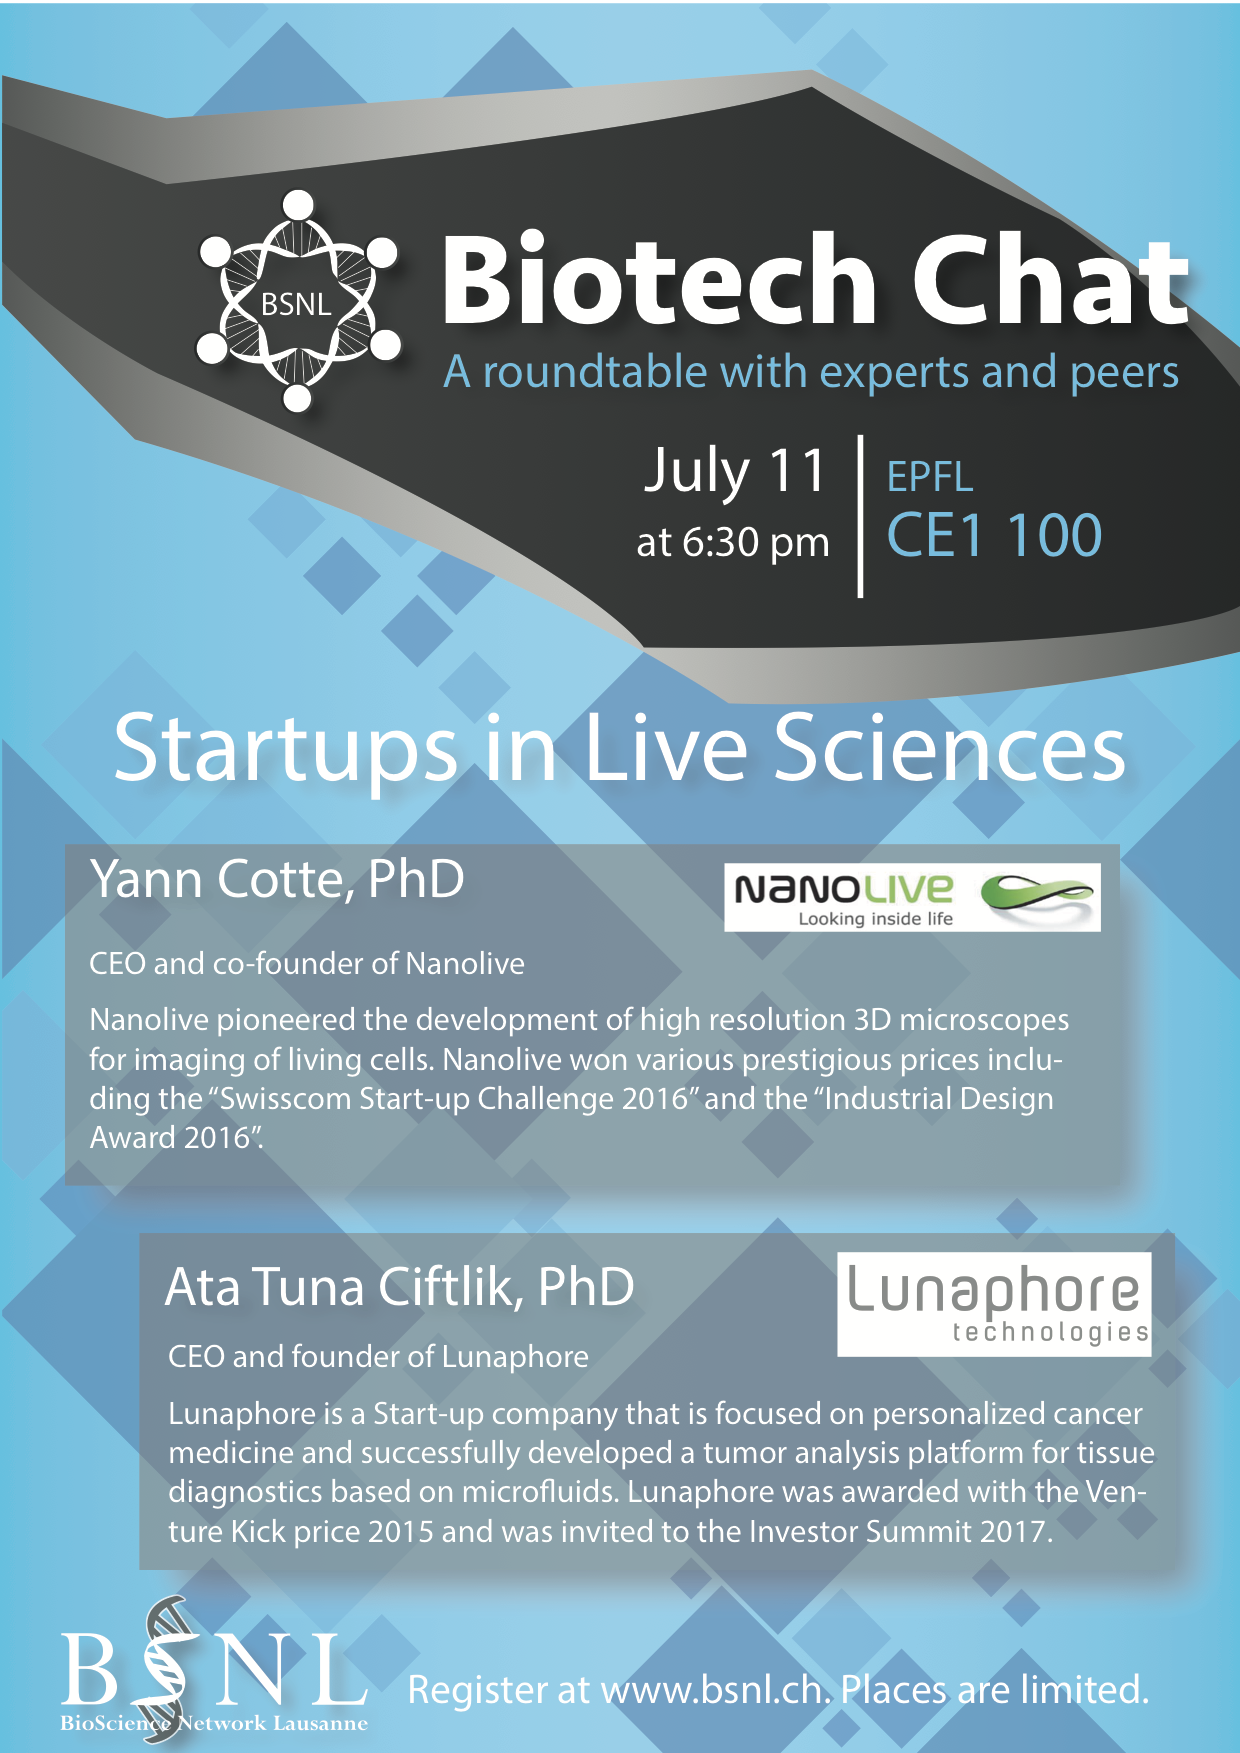 Biotech Chat – Start-ups in Life Sciences, July 11th 2017, CE1 100 at EPFL